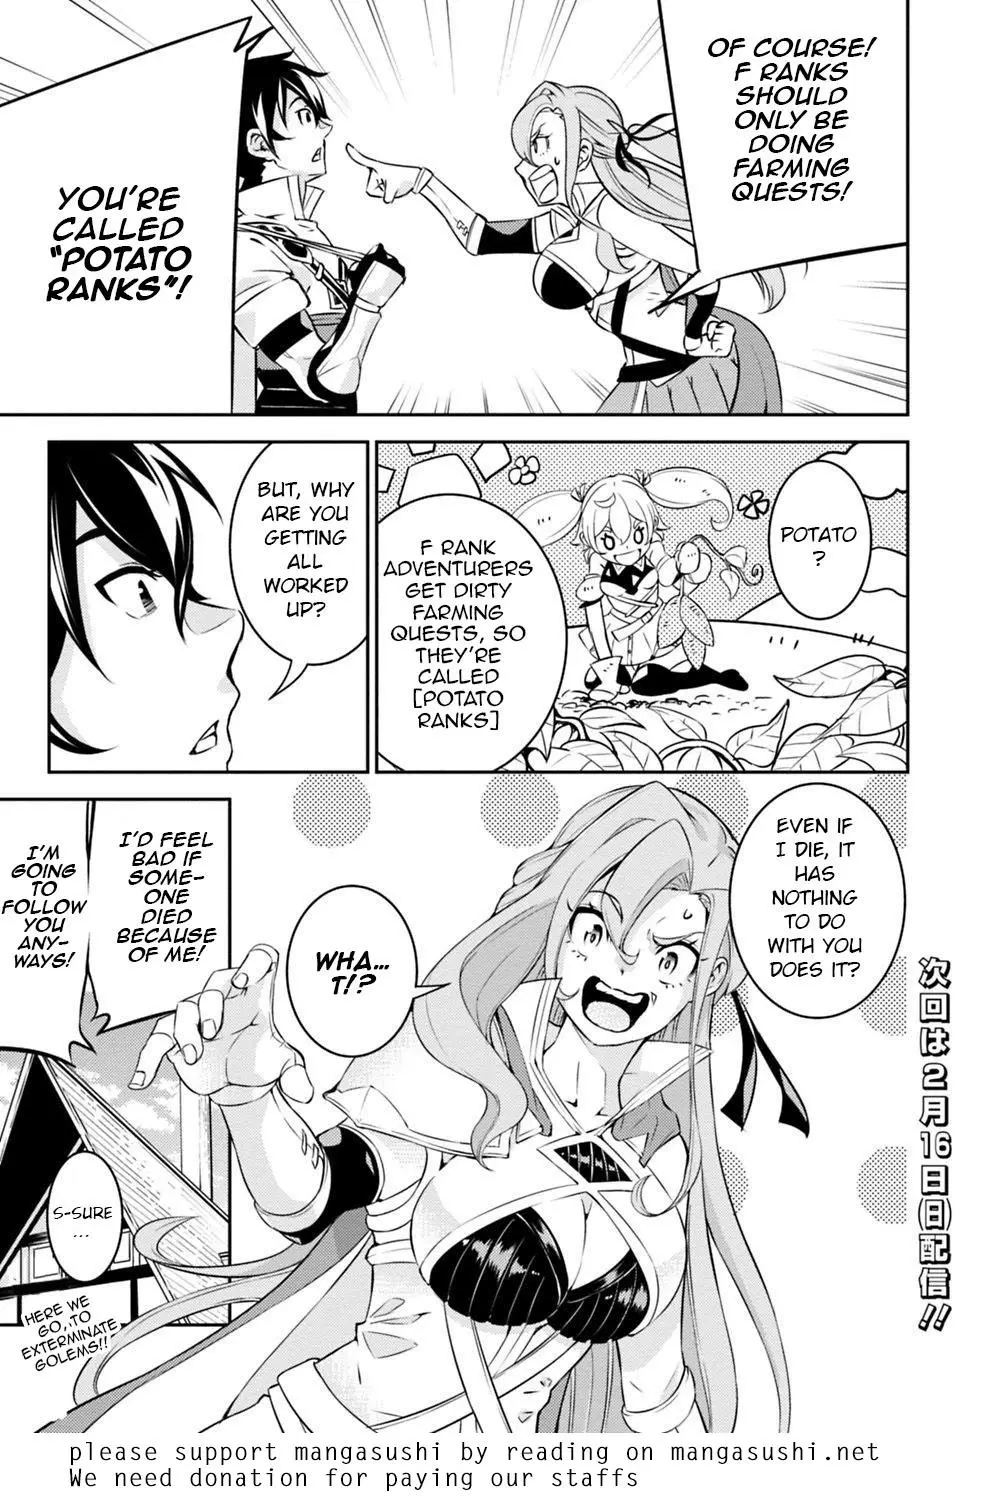 The Strongest Magical Swordsman Ever Reborn As An F-Rank Adventurer. - 16 page 16